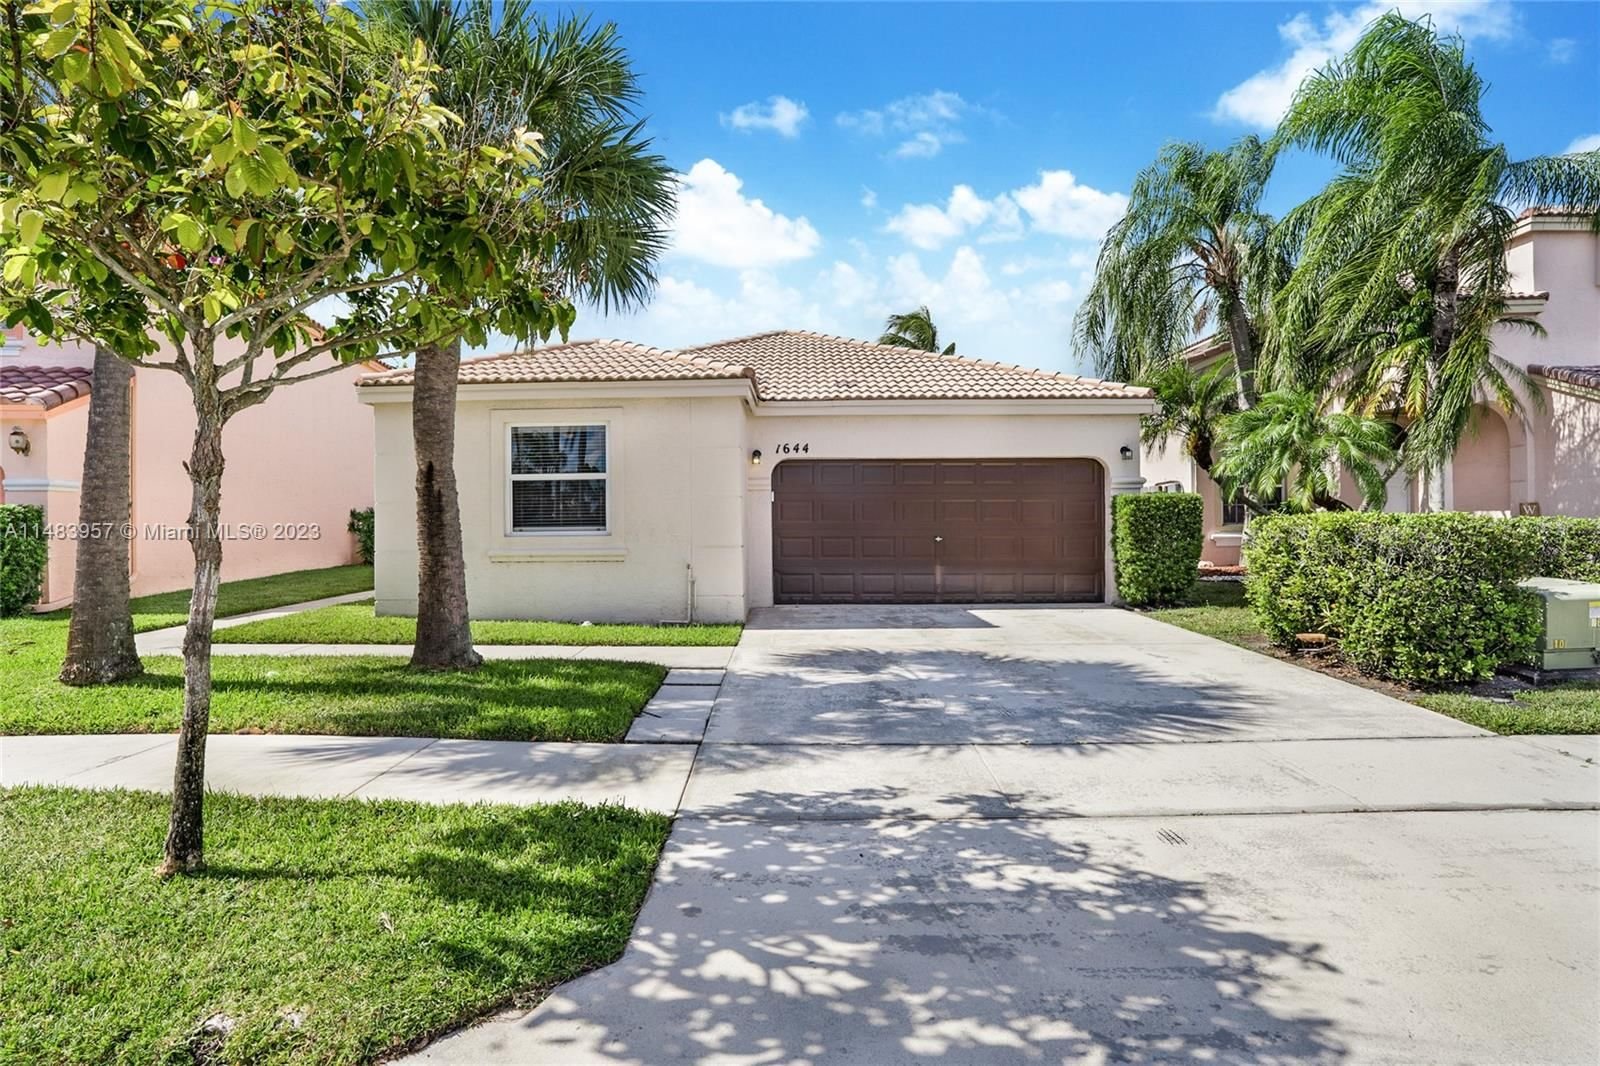 Real estate property located at 1644 158th Ln, Broward County, TOWNGATE, Pembroke Pines, FL